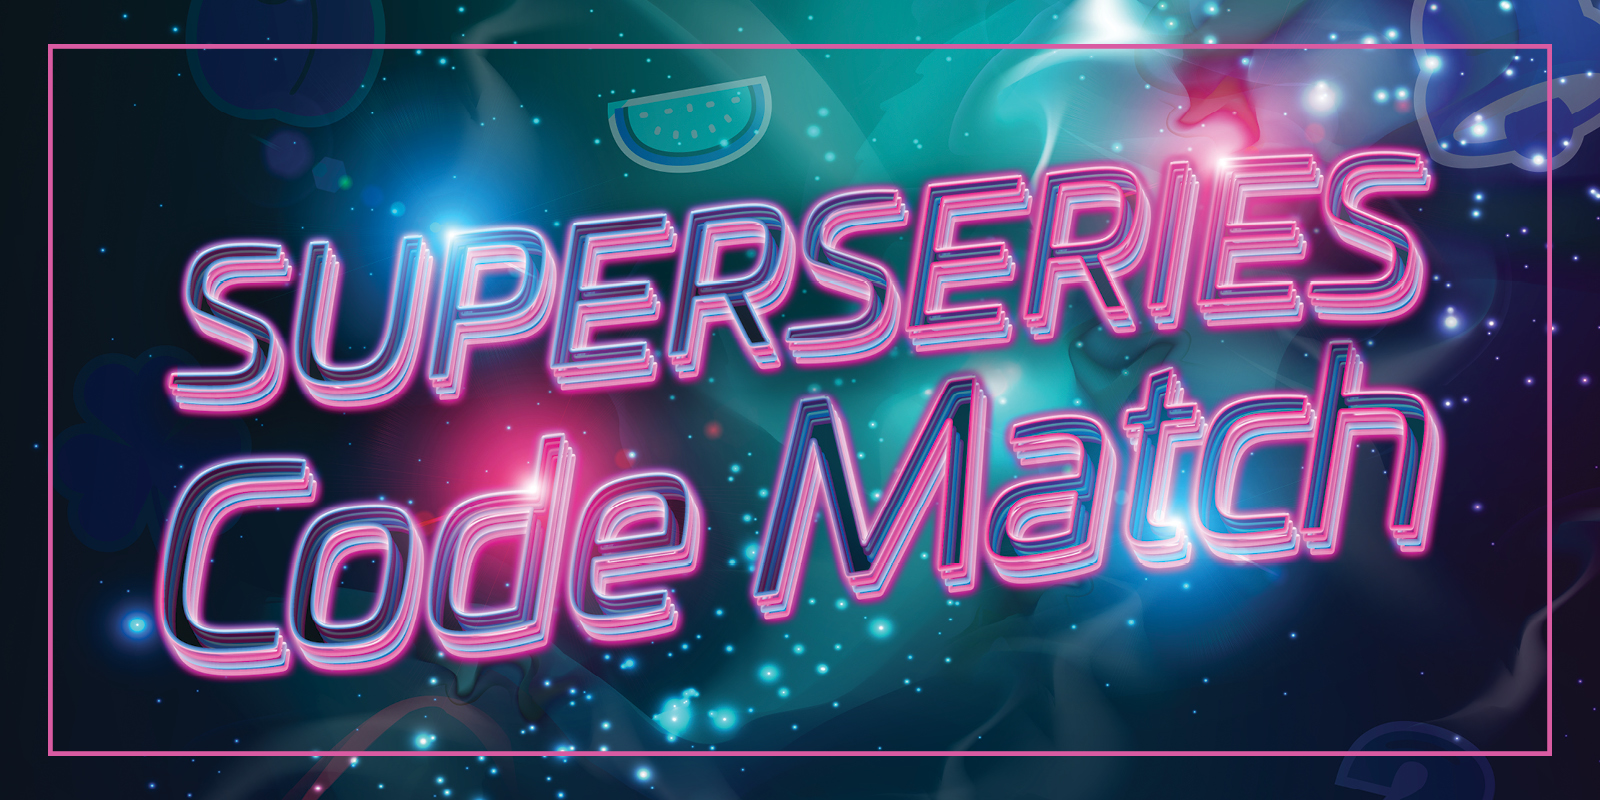 Superseries Code Match Copy